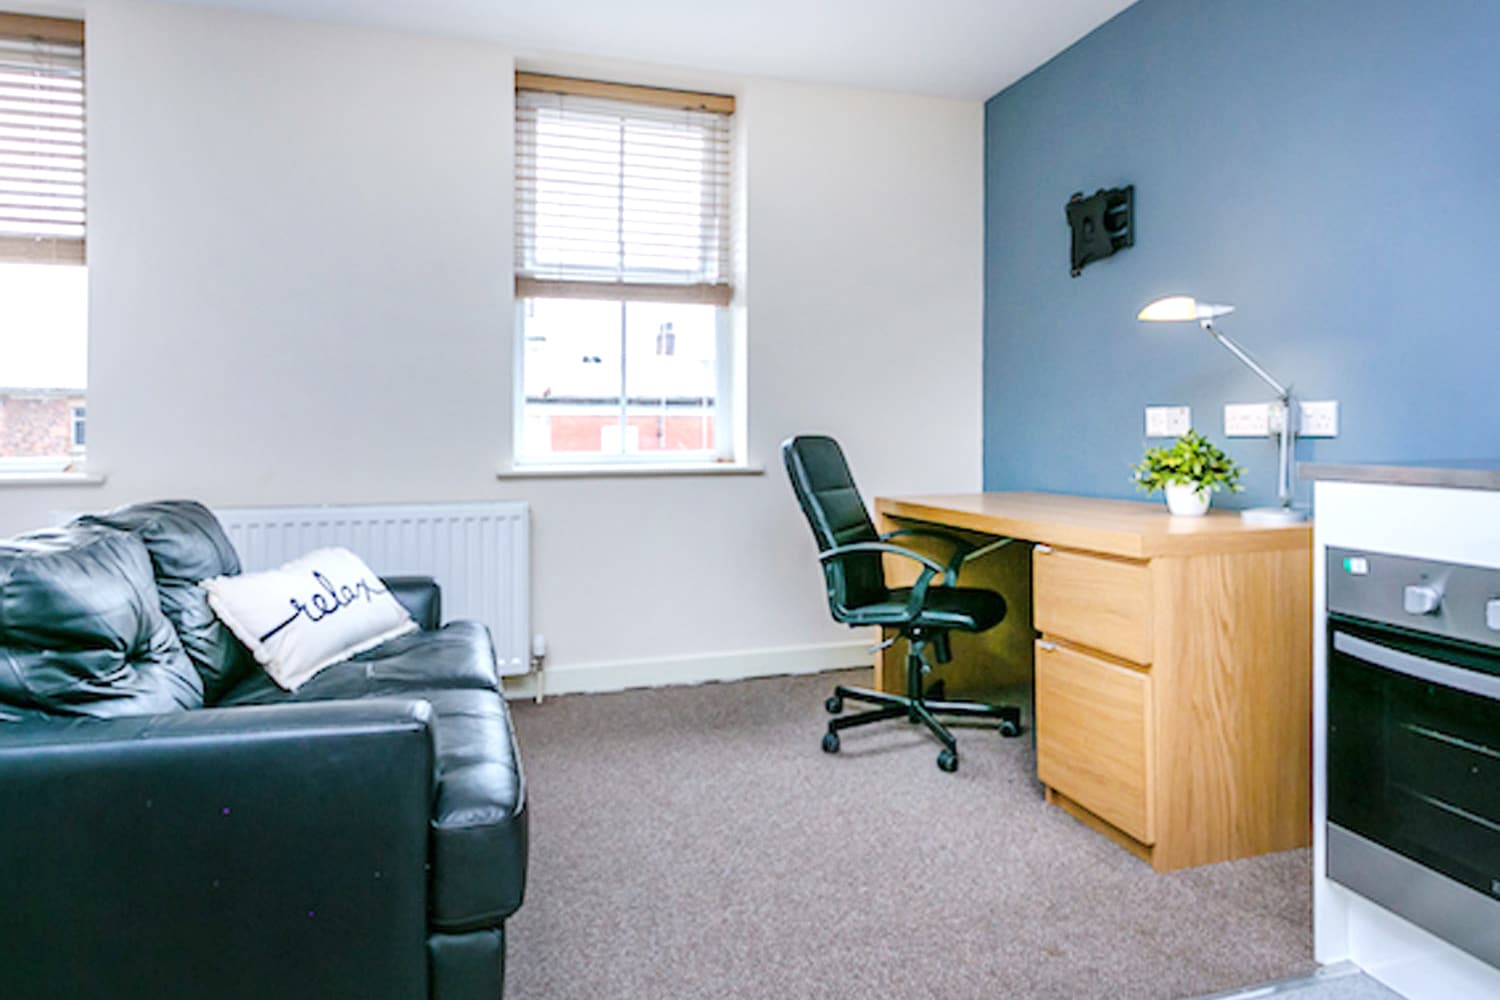 One bedroom Student apartments and studios at The Guild Tavern, First Floor Studio in Preston